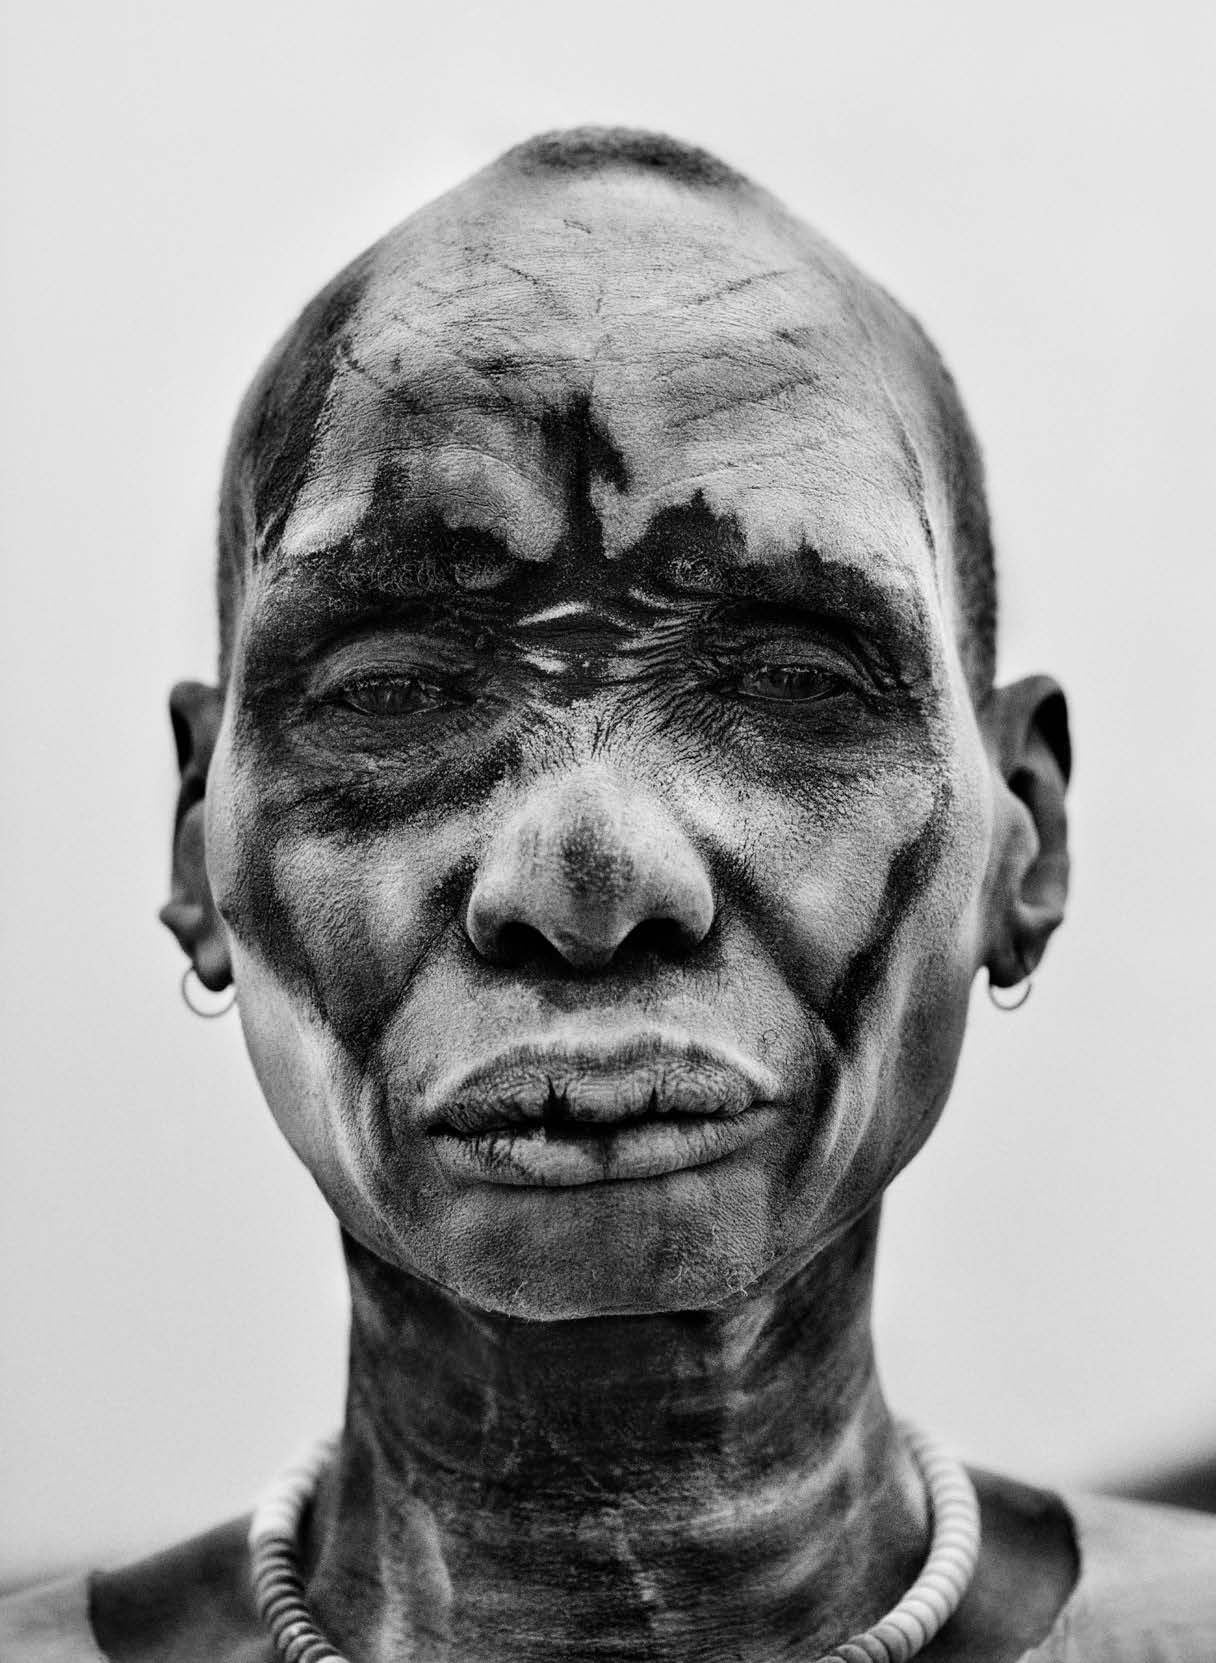 Dinka Man, Southern Sudan, 2006 
Sebastião Salgado
Stamped with photographer's copyright blind stamp
Signed, inscribed on reverse
Silver gelatin print
16 x 20 inches

Undertaking projects of vast temporal and geographic scope, Sebastião Salgado